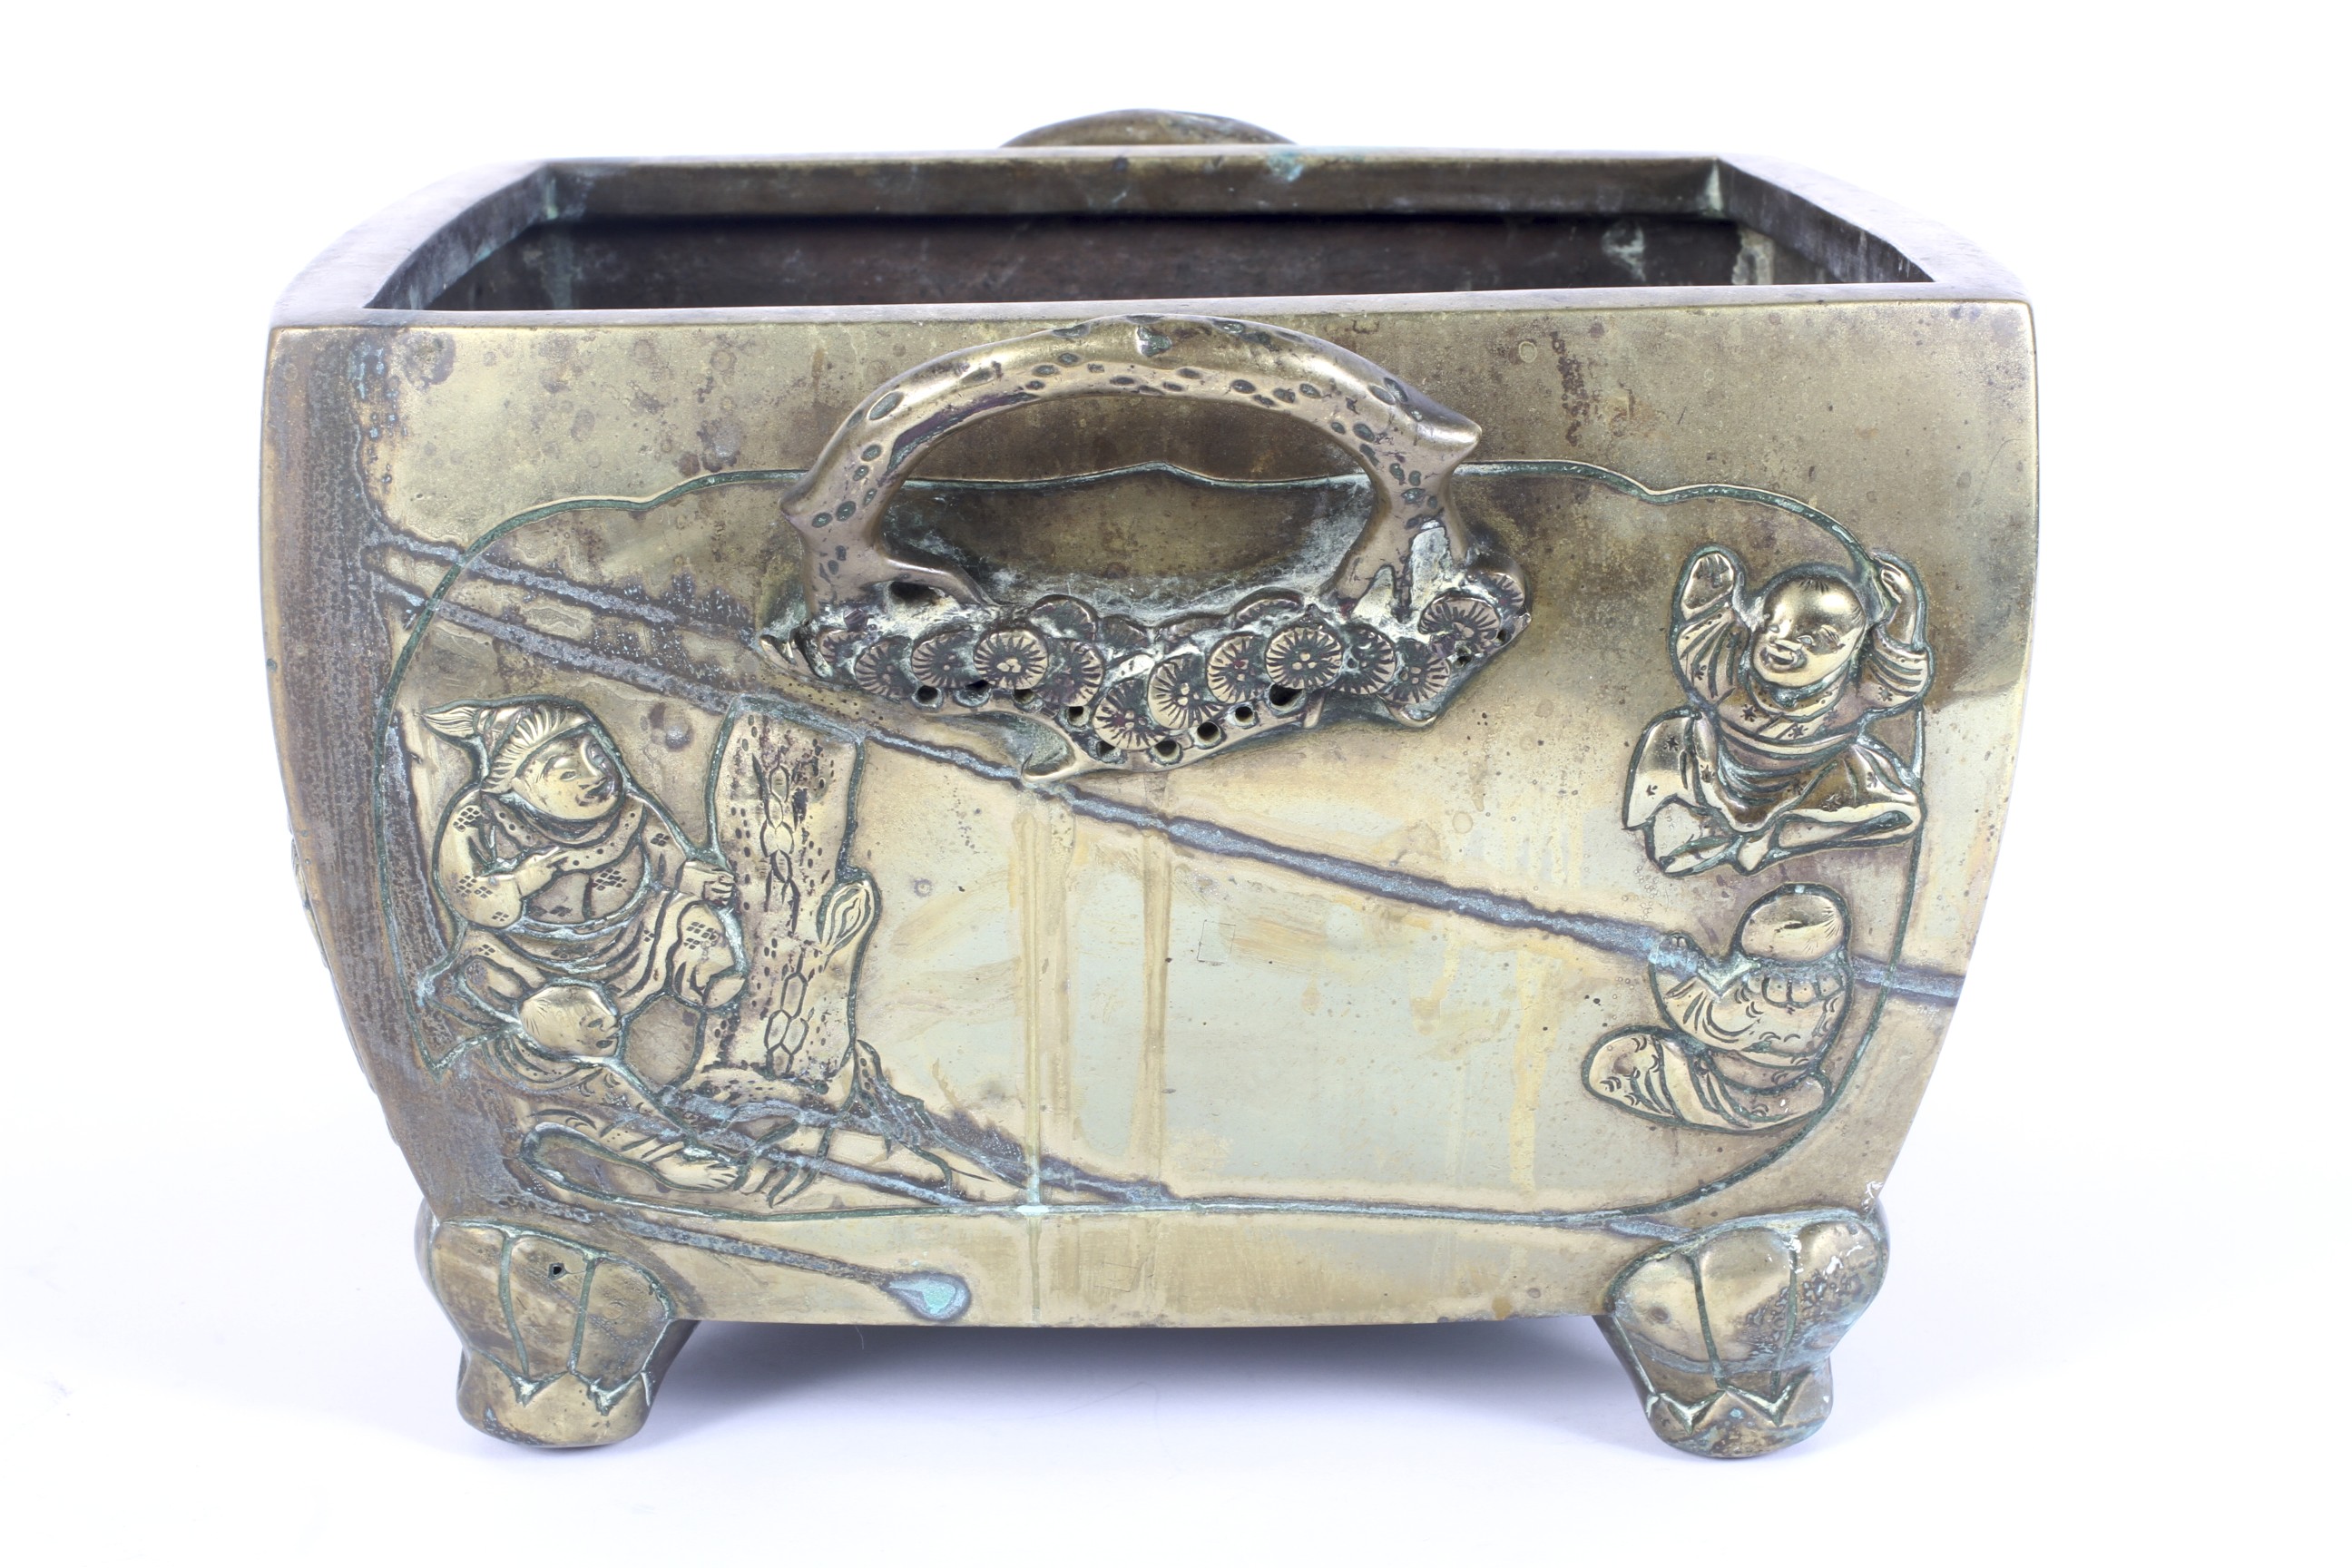 A 19th century Japanese square two-handled bronze censer. - Image 2 of 2